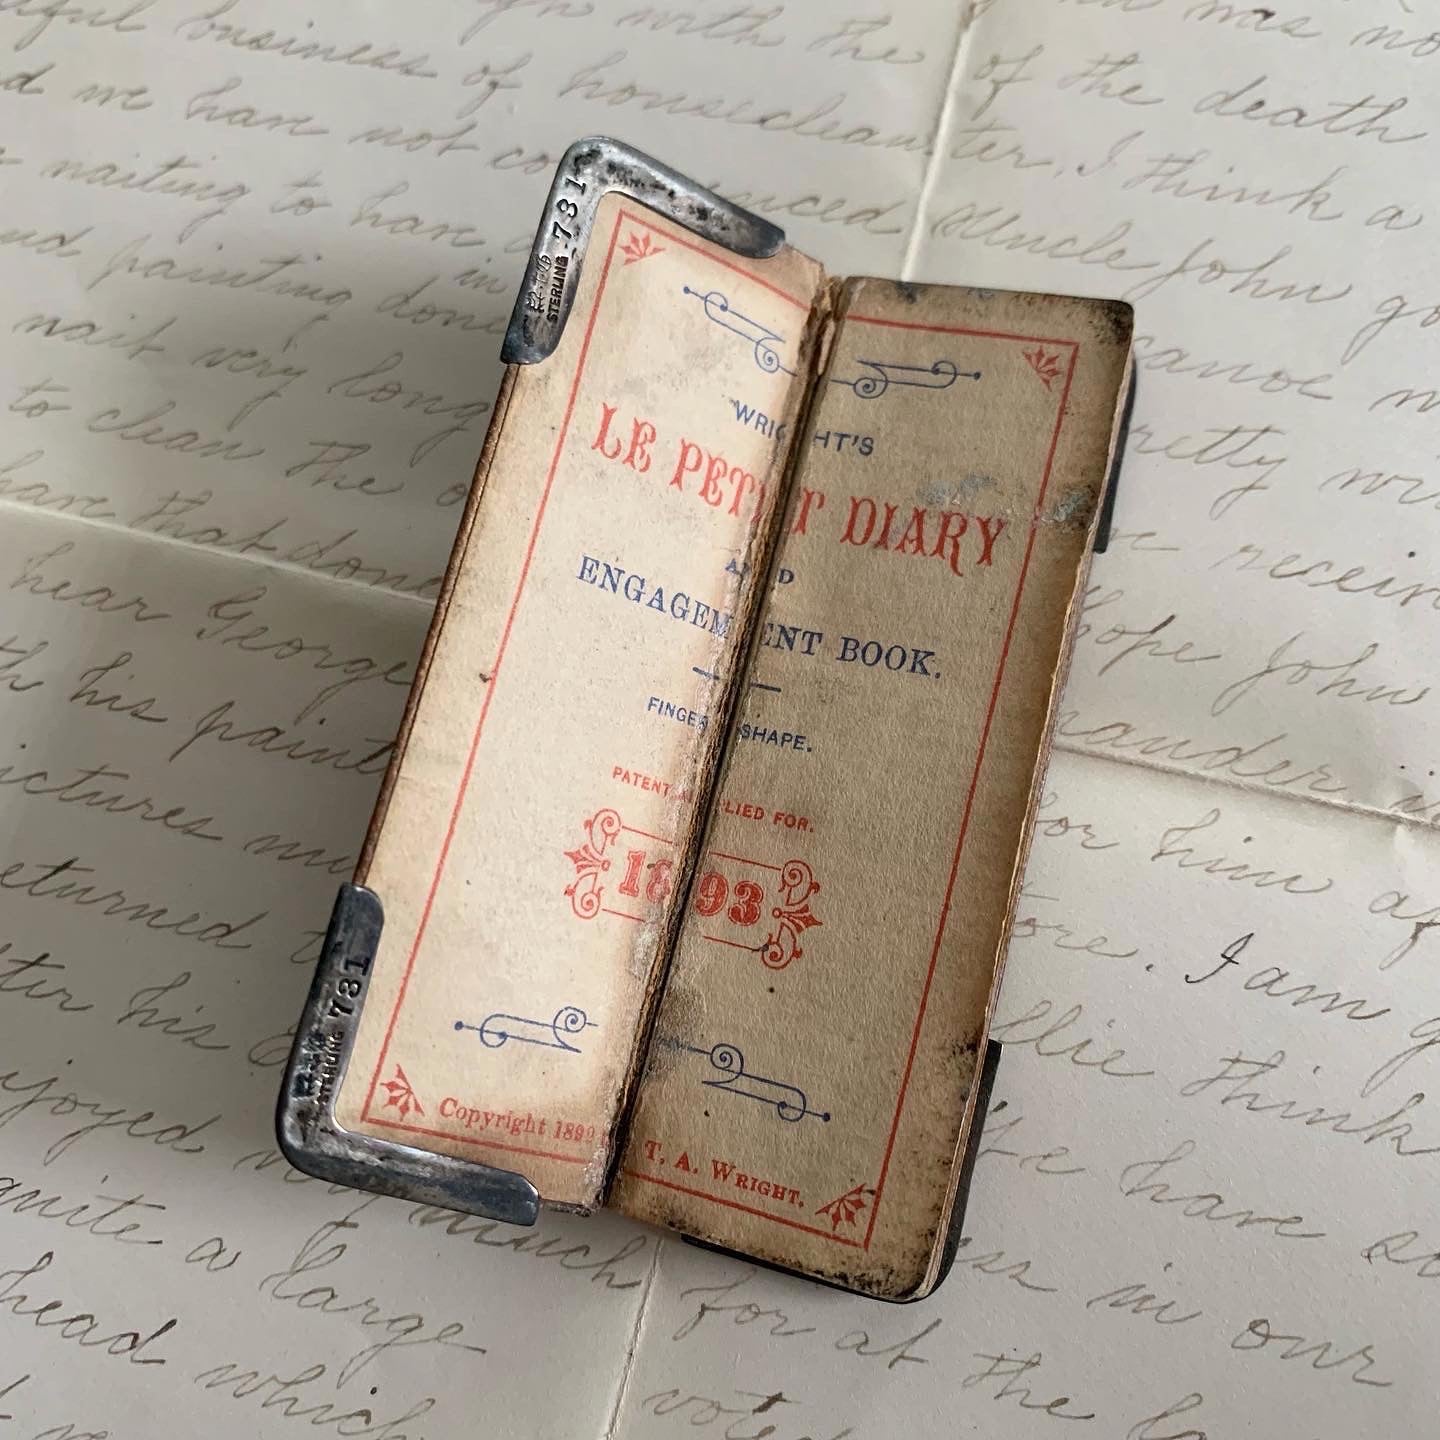 A Victorian Miniature Finger Diary - Wright's Le Petit Diary, 1893